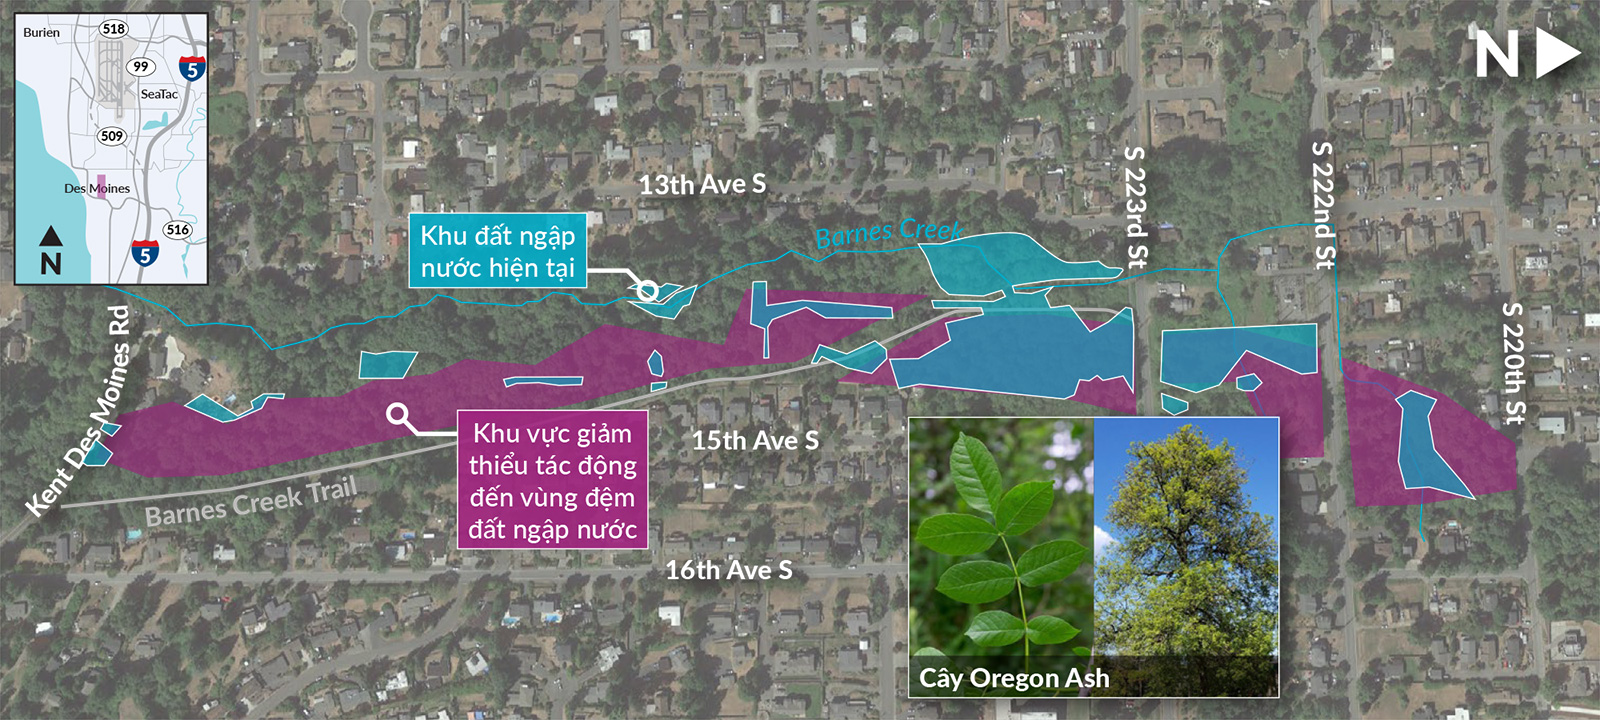 A map of the Barnes Creek Wetland Mitigation Site showing existing wetland areas and wetland buffer mitigation areas, all labels in Vietnamese.
